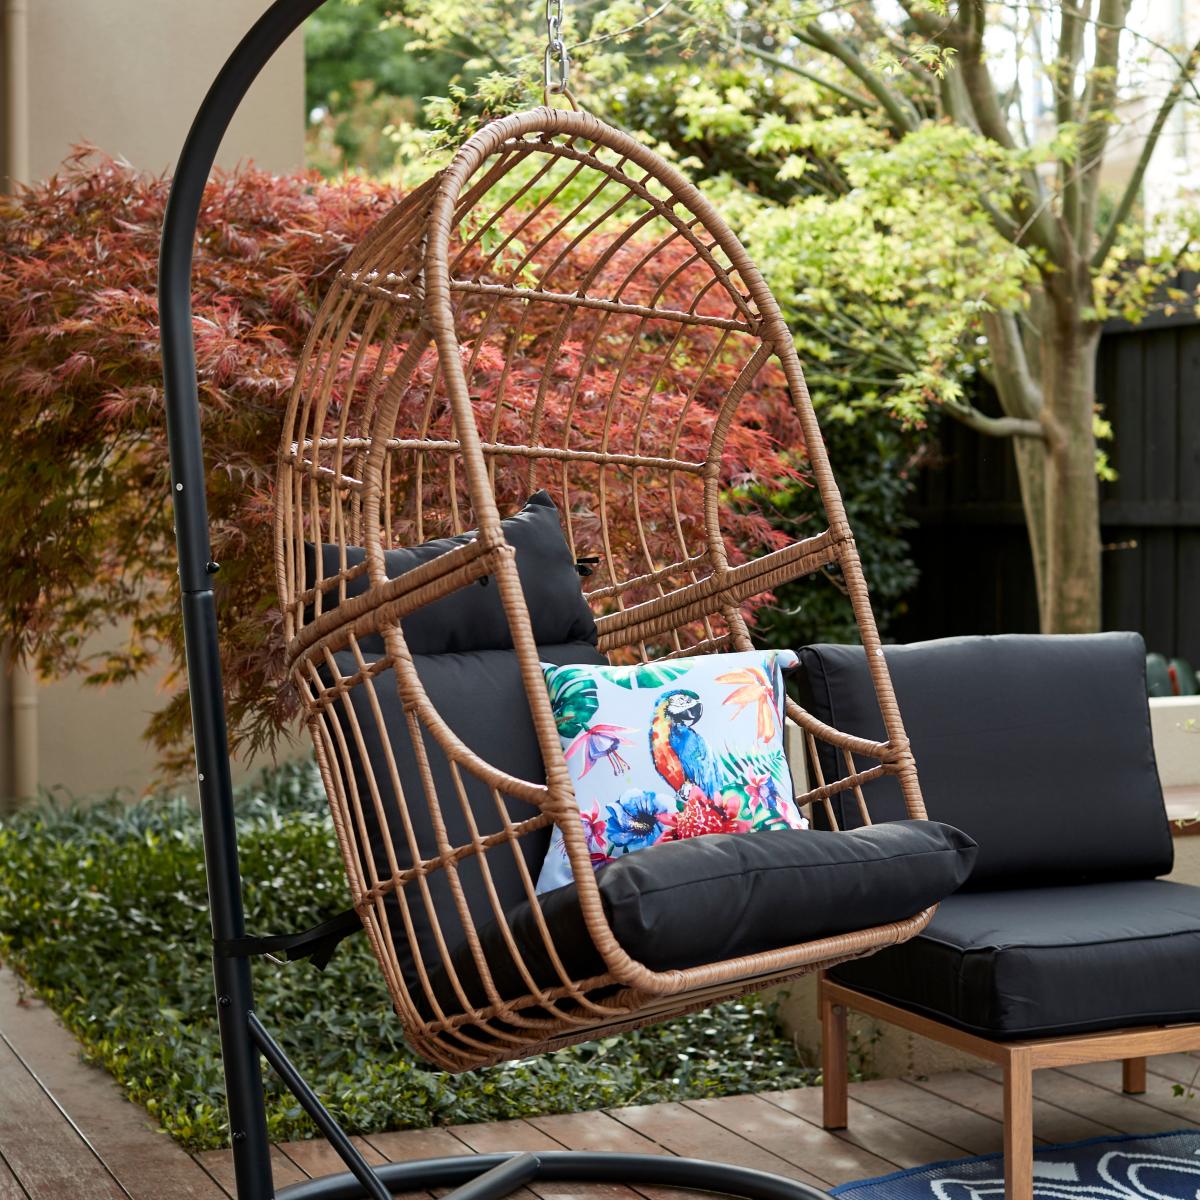 Kmart Is Releasing A Swish Egg Chair As Part Of New Online Only Range